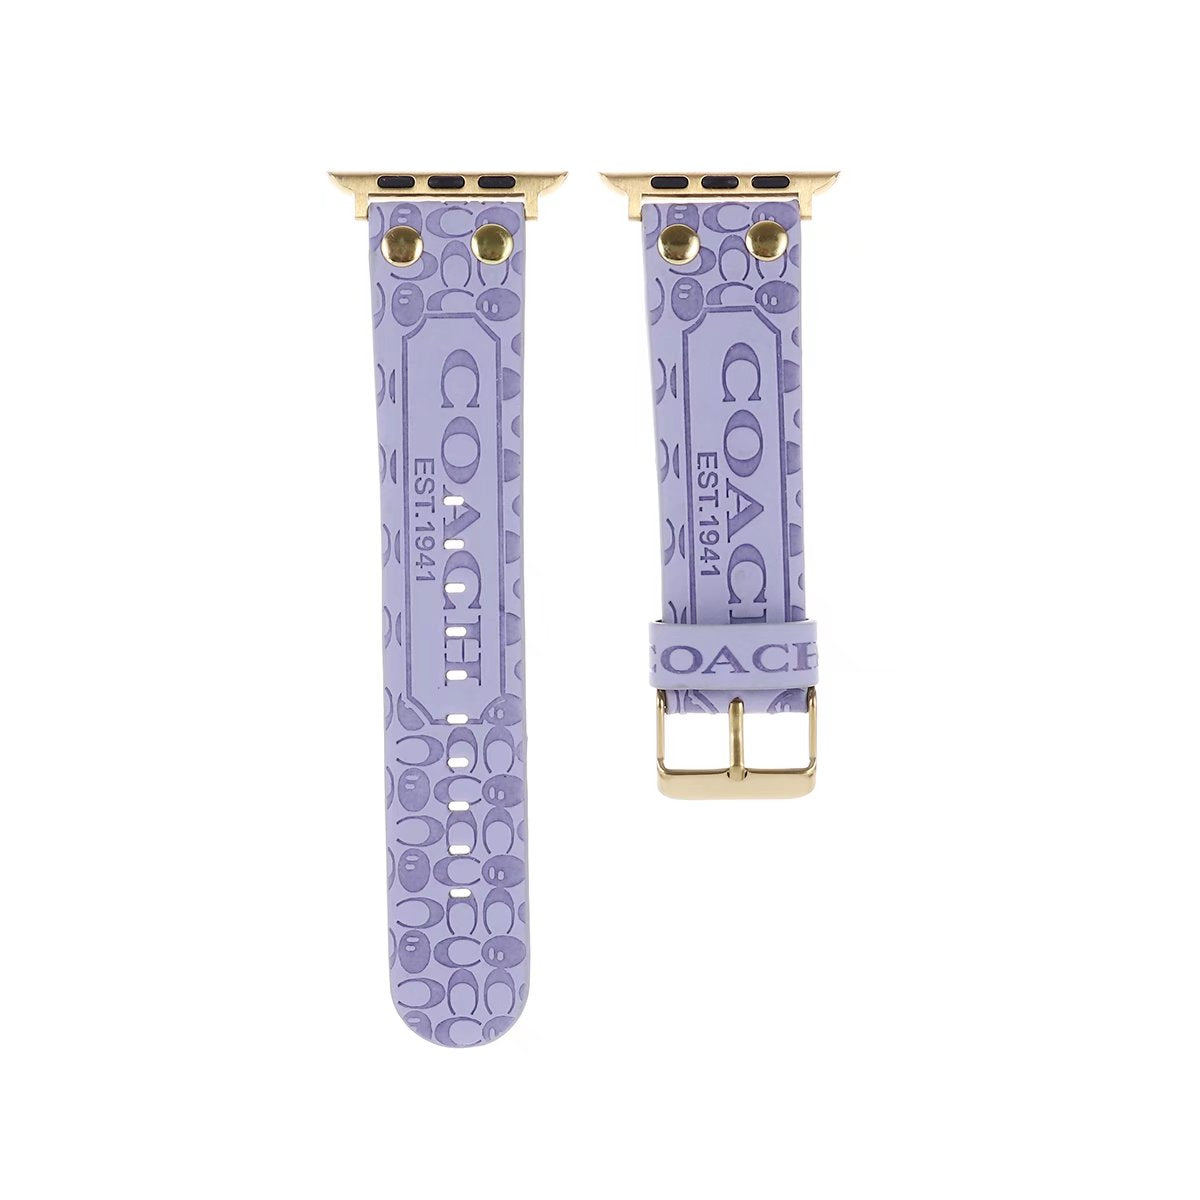 Debossed Coach Watch Band in lilac